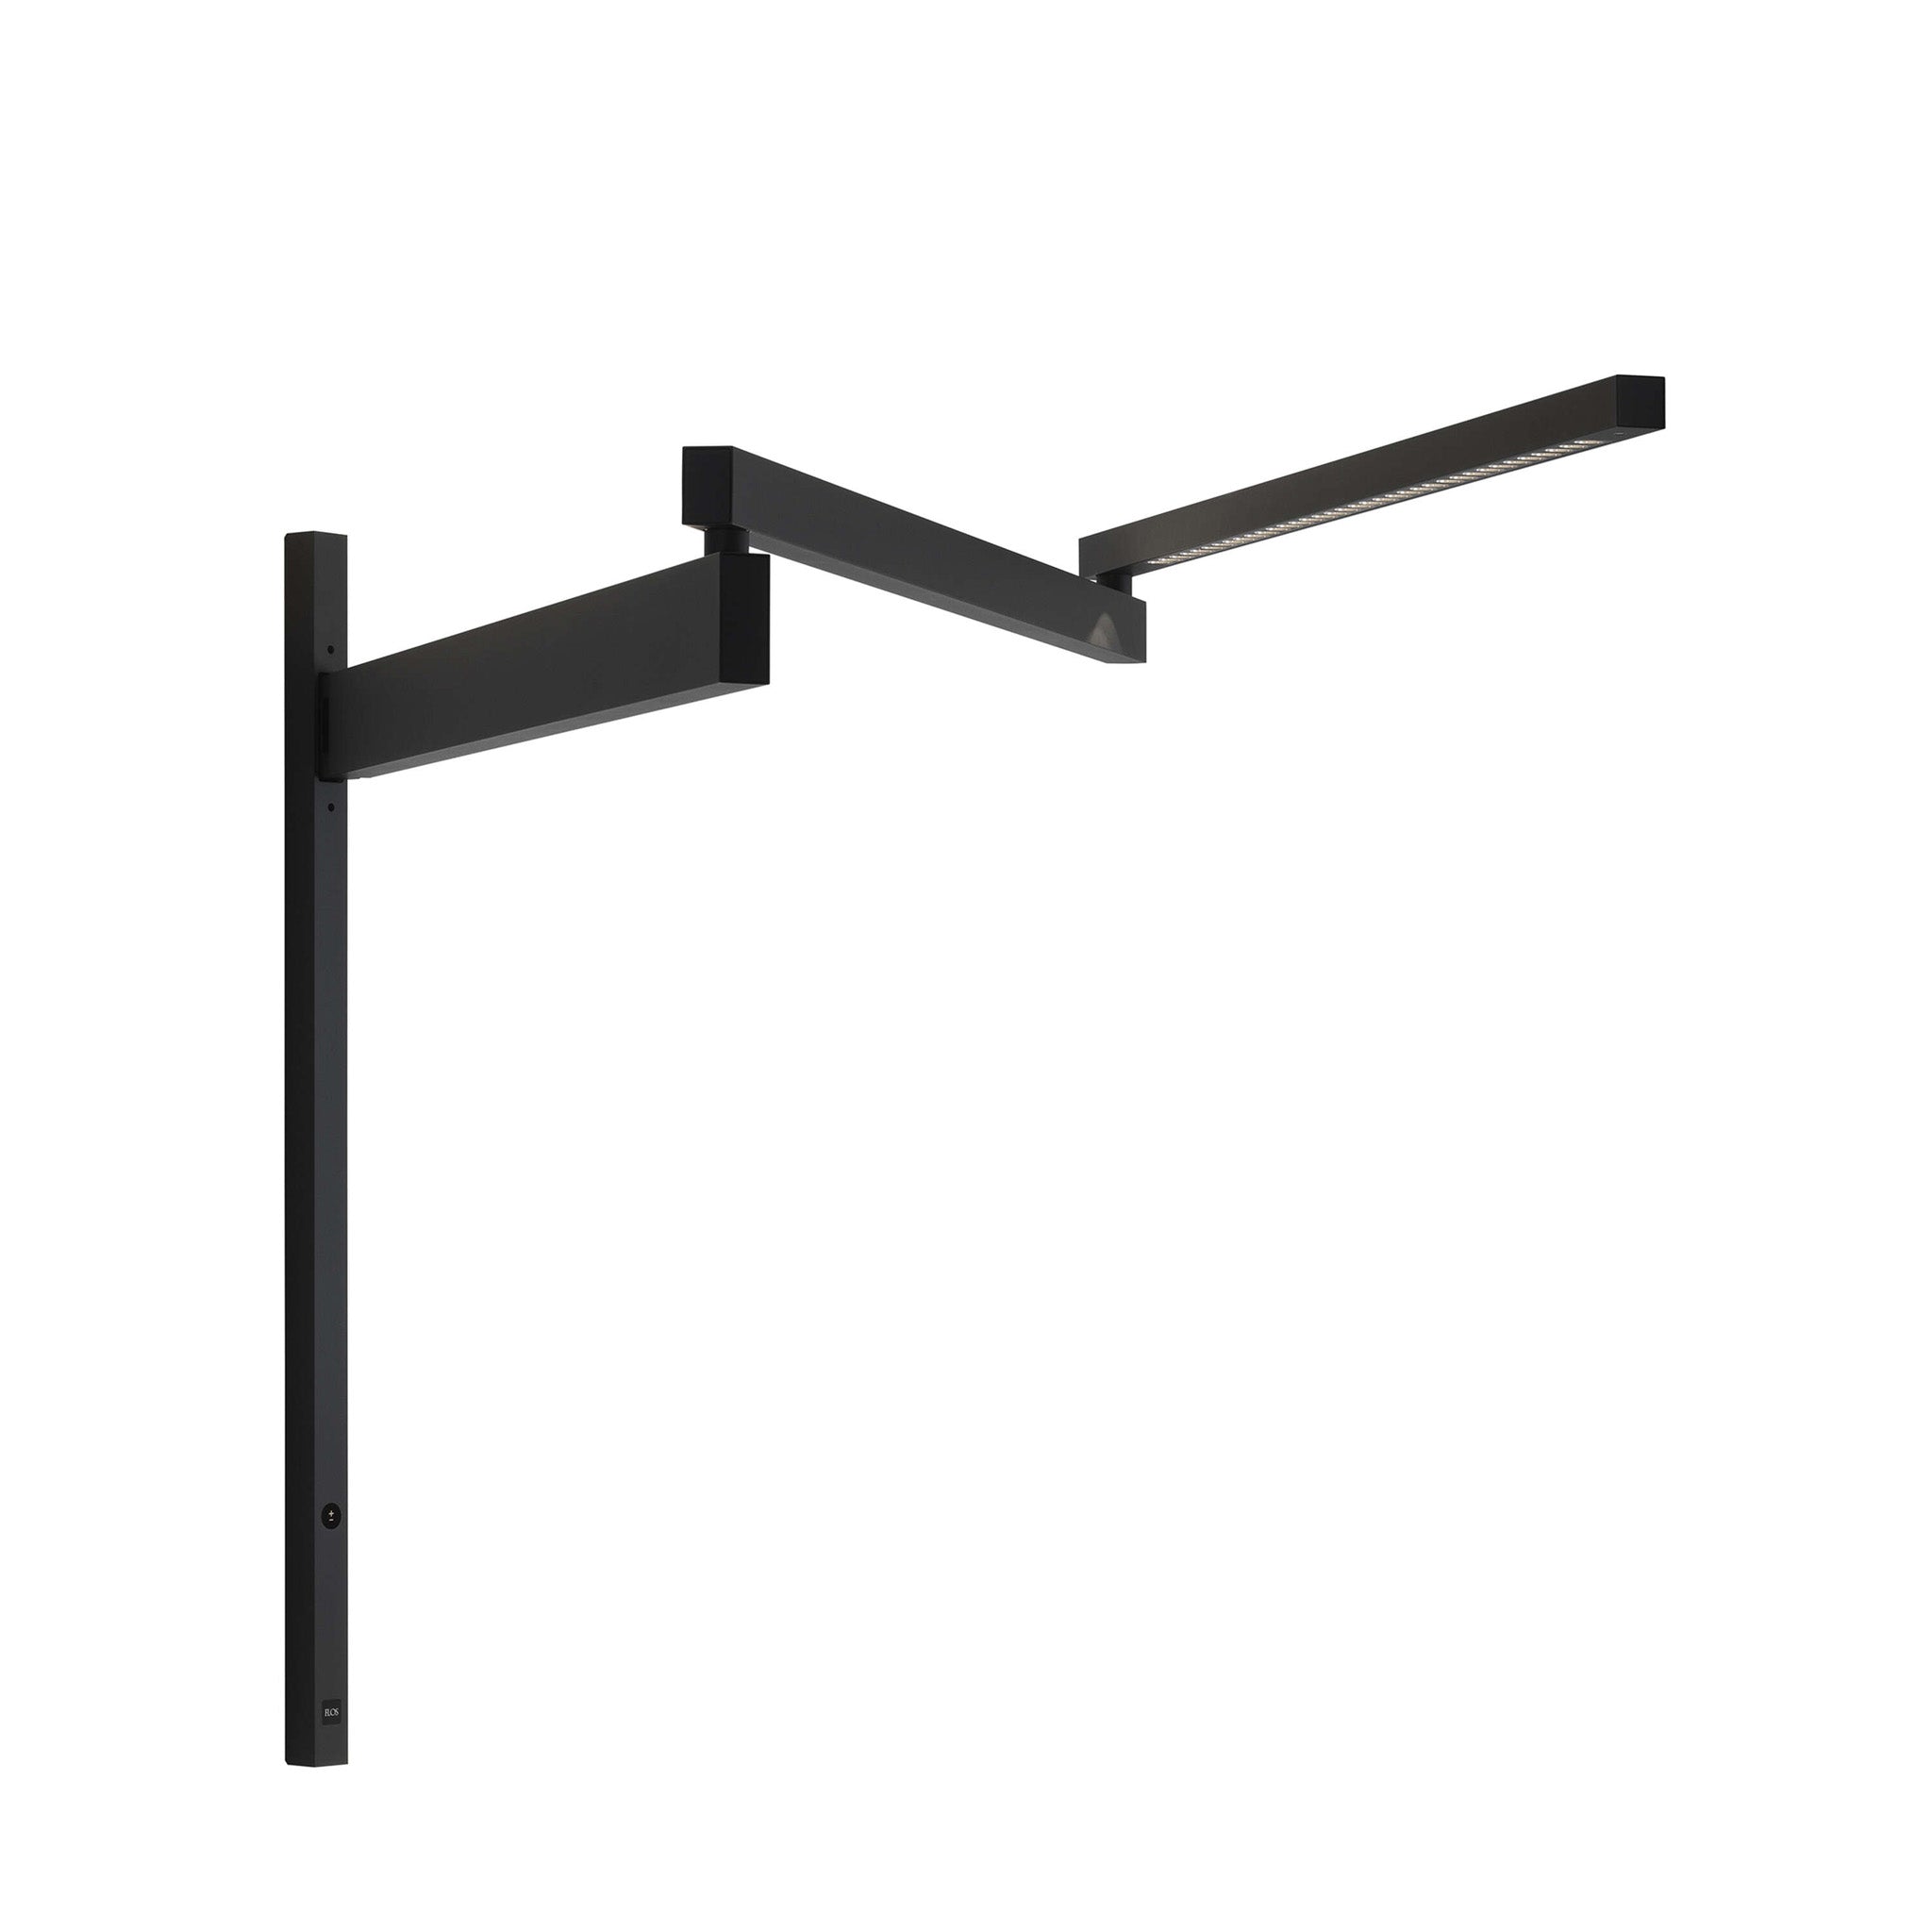 Black Flag Wall Lamp by Konstantin Grcic for Flos